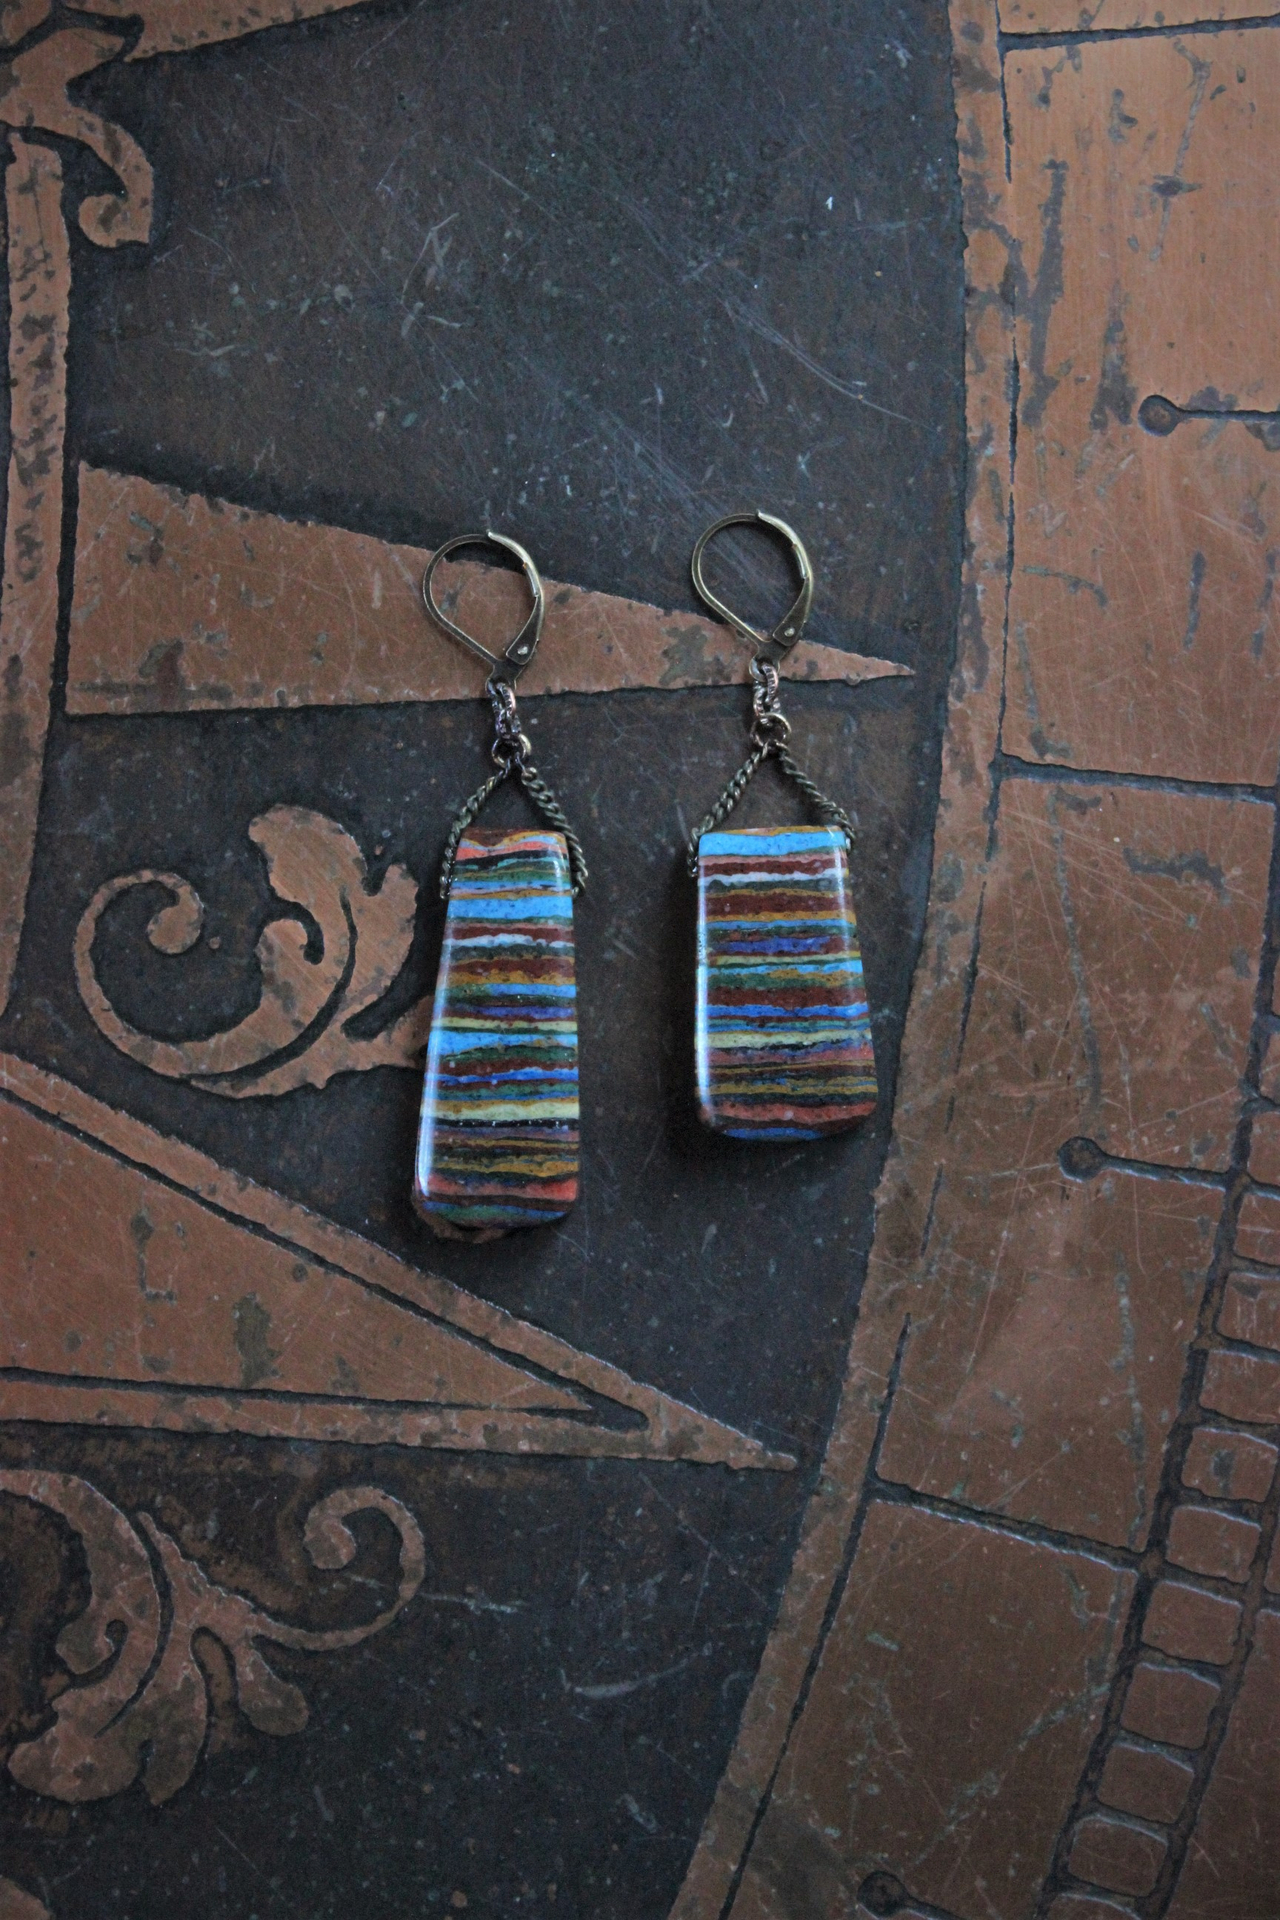 Rainbow Calcite Earrings with Bronze Earring Wires - Free with Purchase of Necklace!